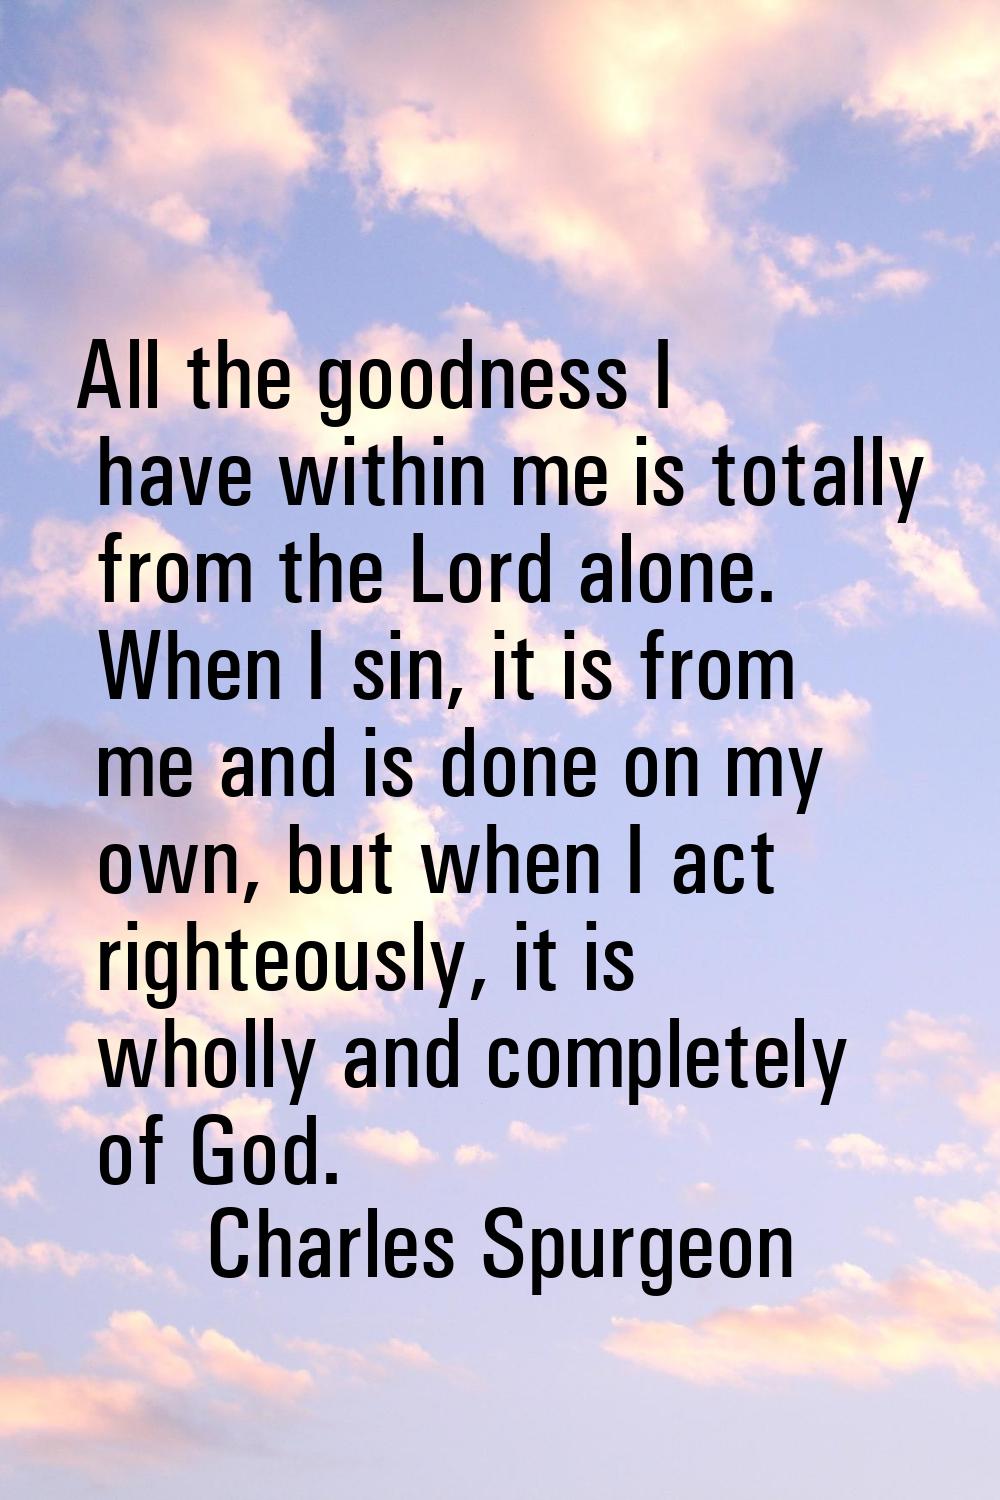 All the goodness I have within me is totally from the Lord alone. When I sin, it is from me and is 